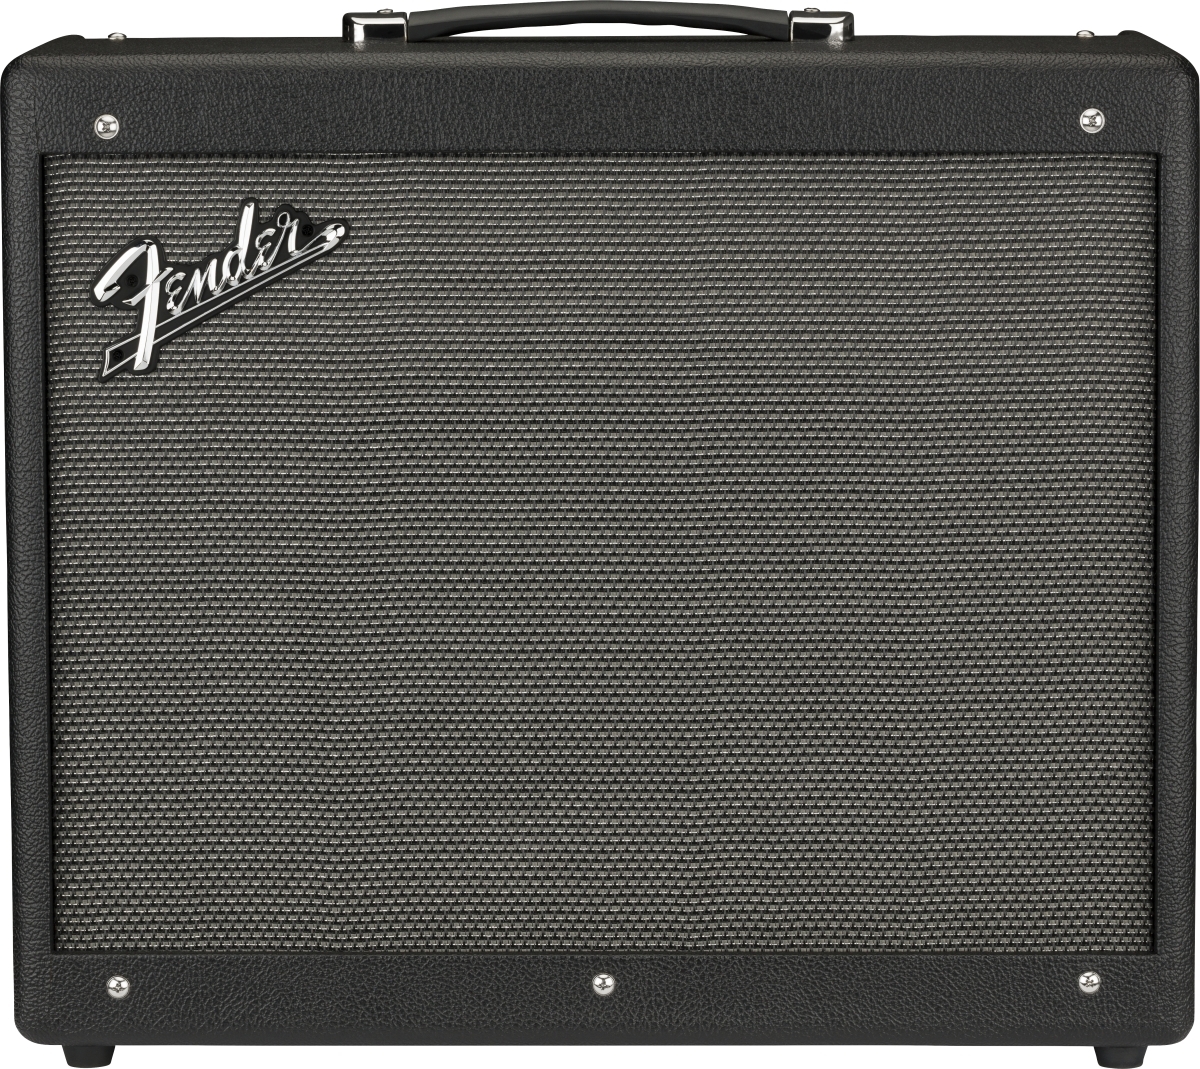 Fender Mustang Gtx 100 1x12 10w - Electric guitar combo amp - Main picture